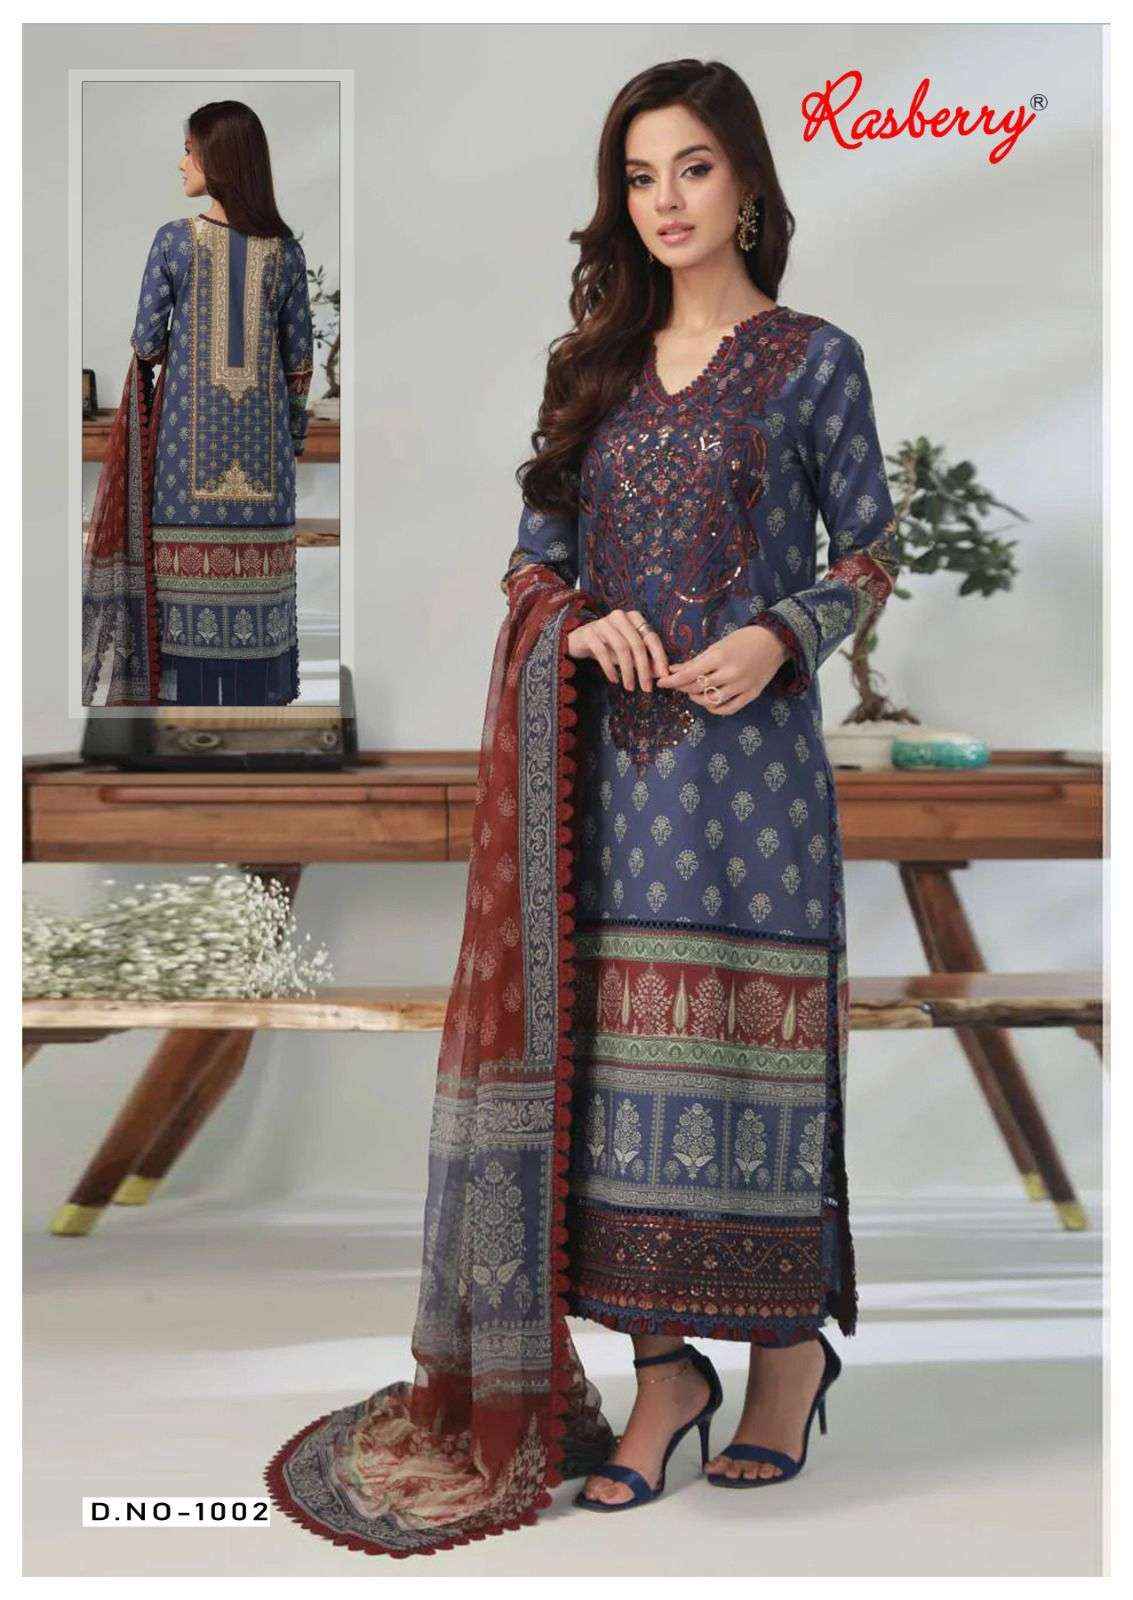 Embroidered Karachi Style Semi Lawn Suit @ 34% OFF Rs 2059.00 Only FREE  Shipping + Extra Discount - Embroidered Suits, Buy Embroidered Suits Online,  Karachi Style Sui, Designer Karachi Style, Buy Designer Karachi Style, -  iStYle99.com